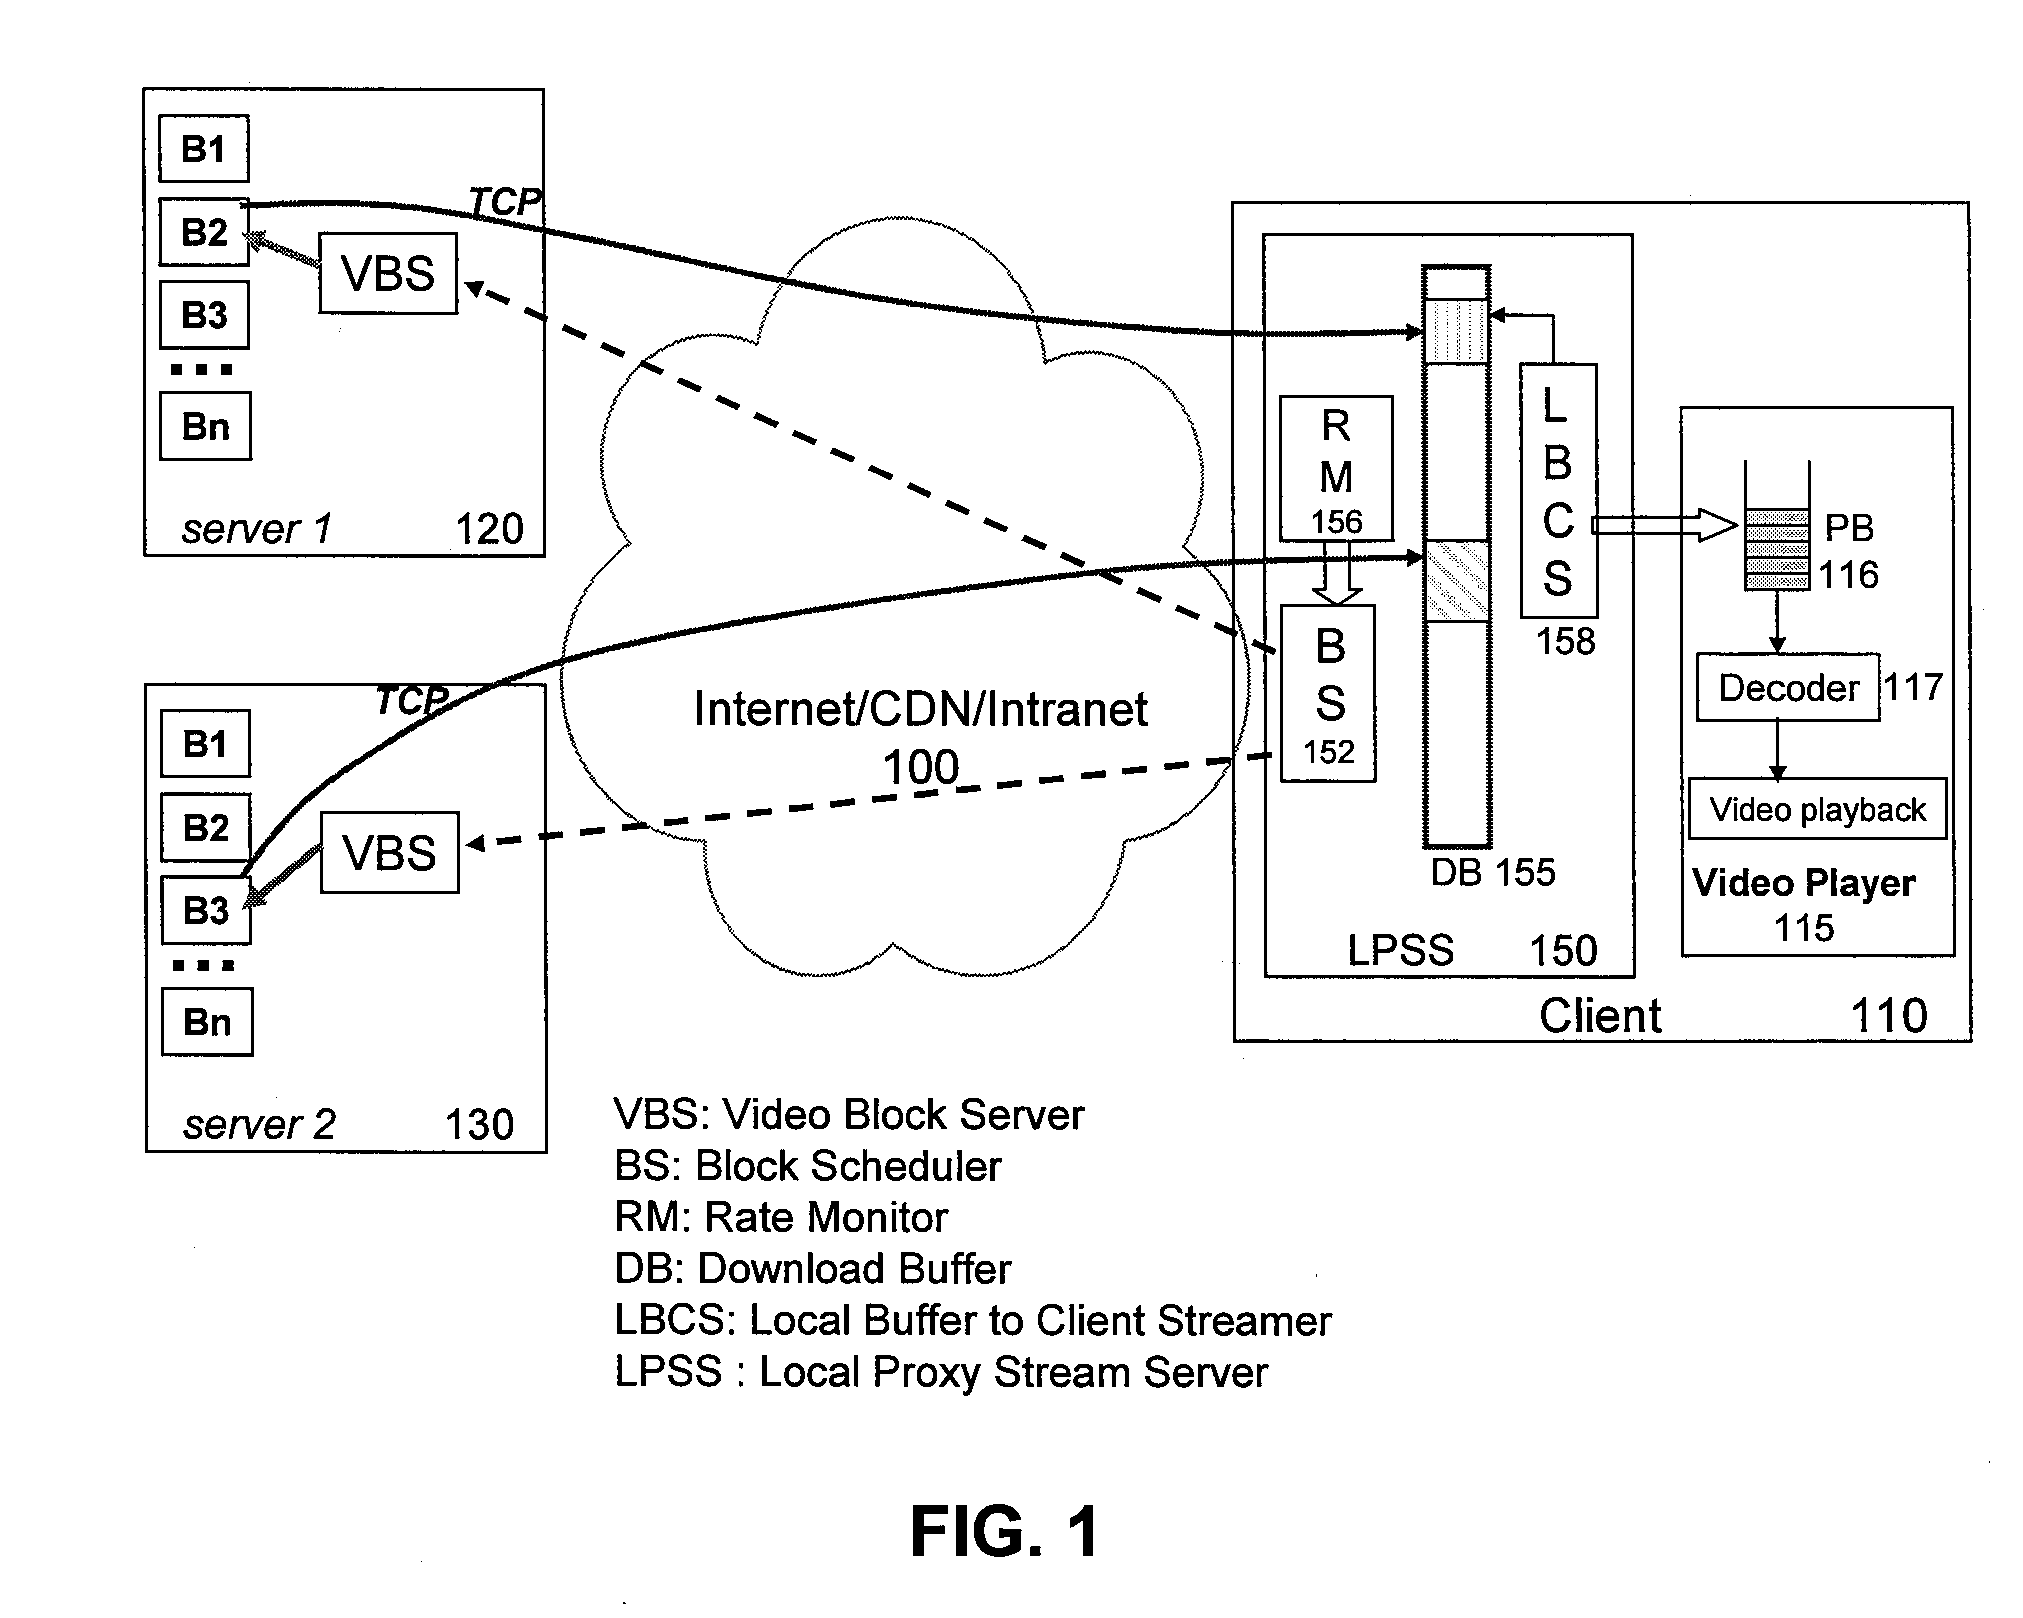 System and Method for Parallel Indirect Streaming of Stored Media from Multiple Sources